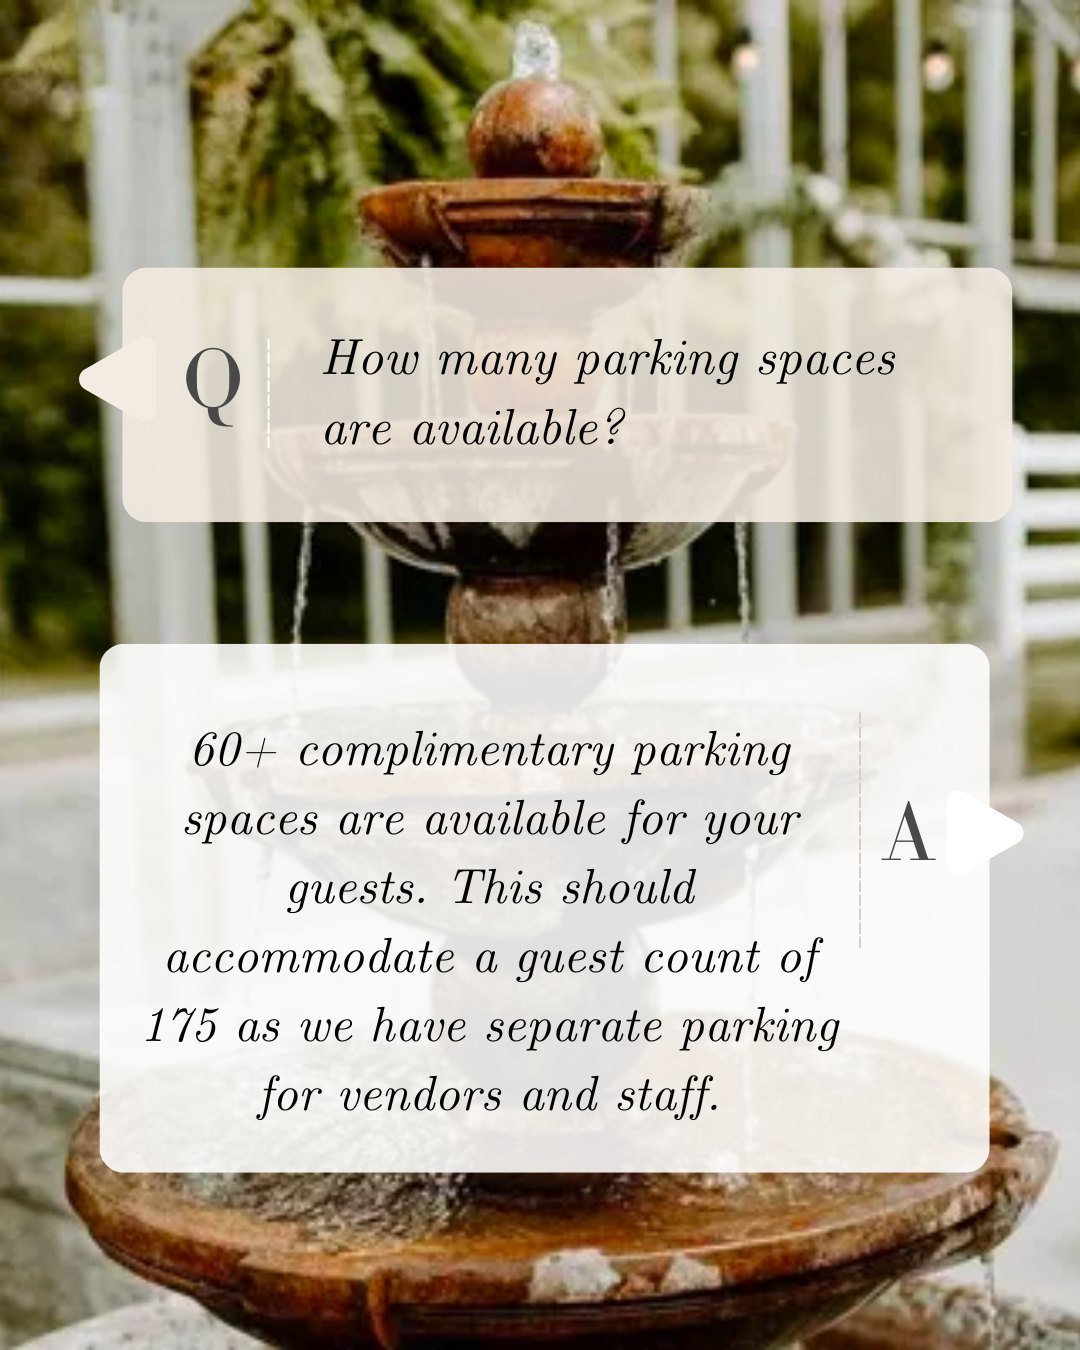 Parking details are always important for big events. We have 60+ complimentary parking spots for your guests. We do suggest mentioning that parking is limited and carpooling is recommended! Uber + Lyft are always a great option as well...especially a